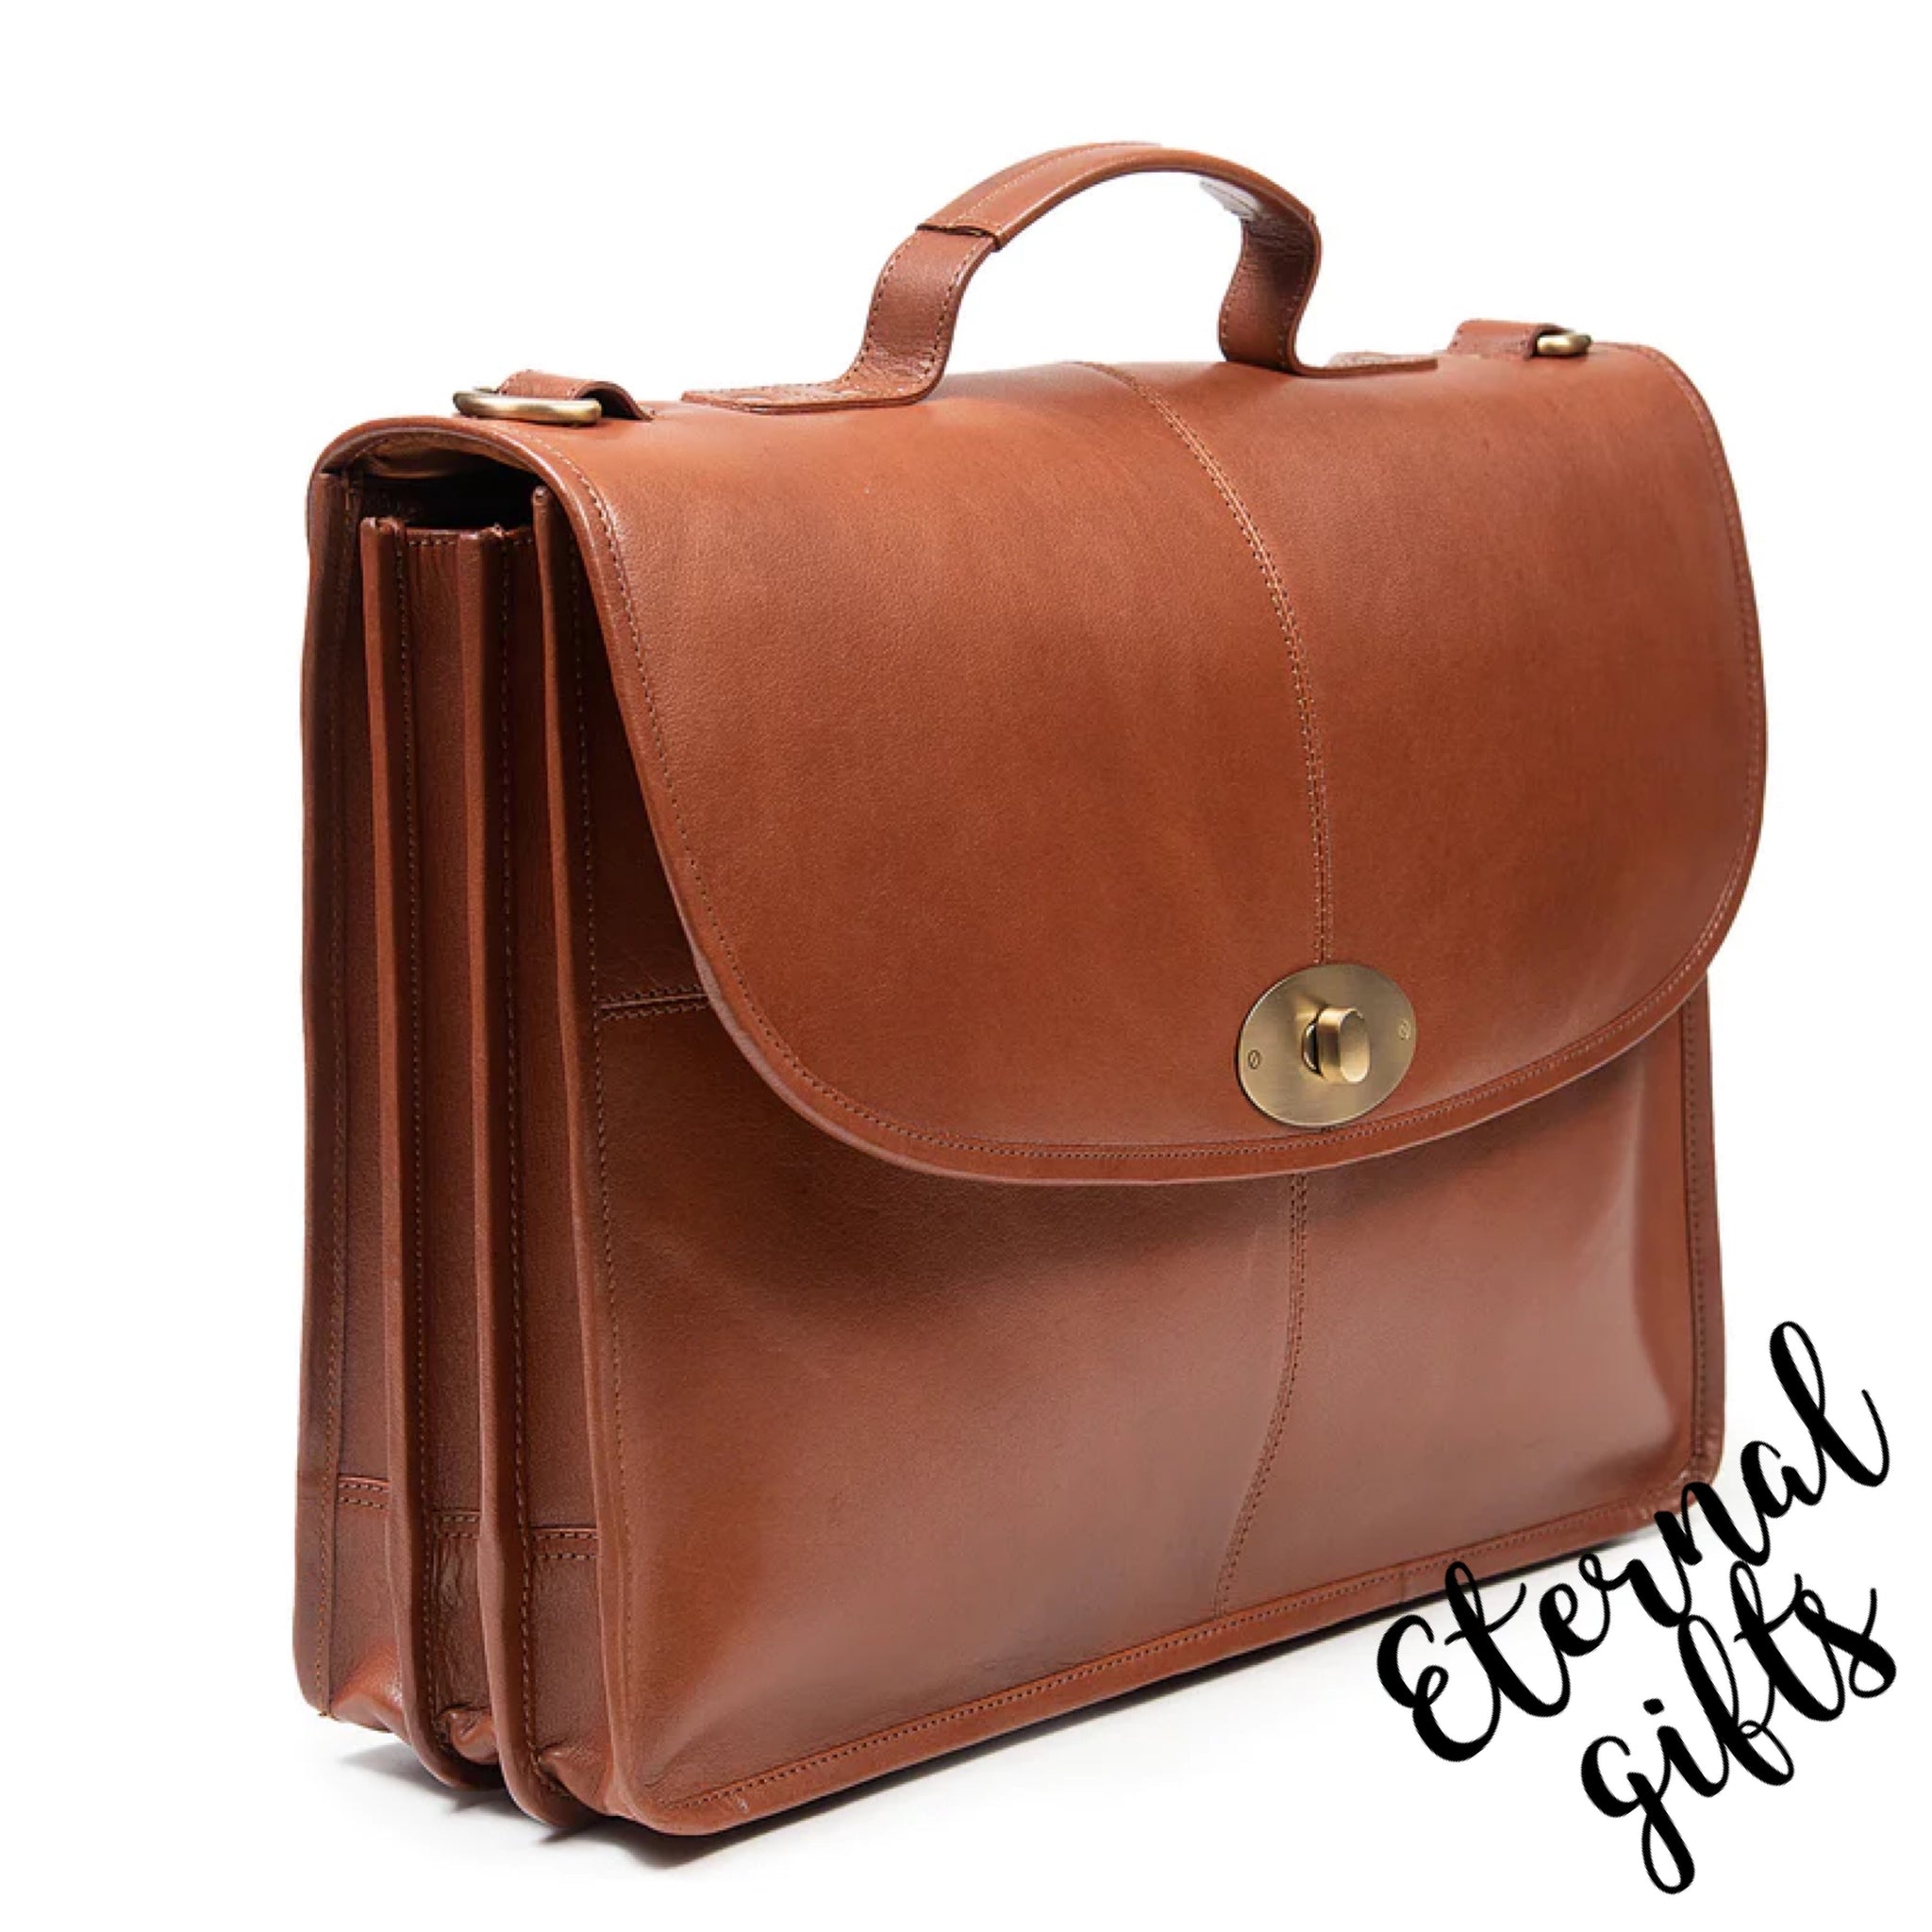 The Ballyjohnboy Leather Briefcase in Tan - Tinnakeenly Leathers